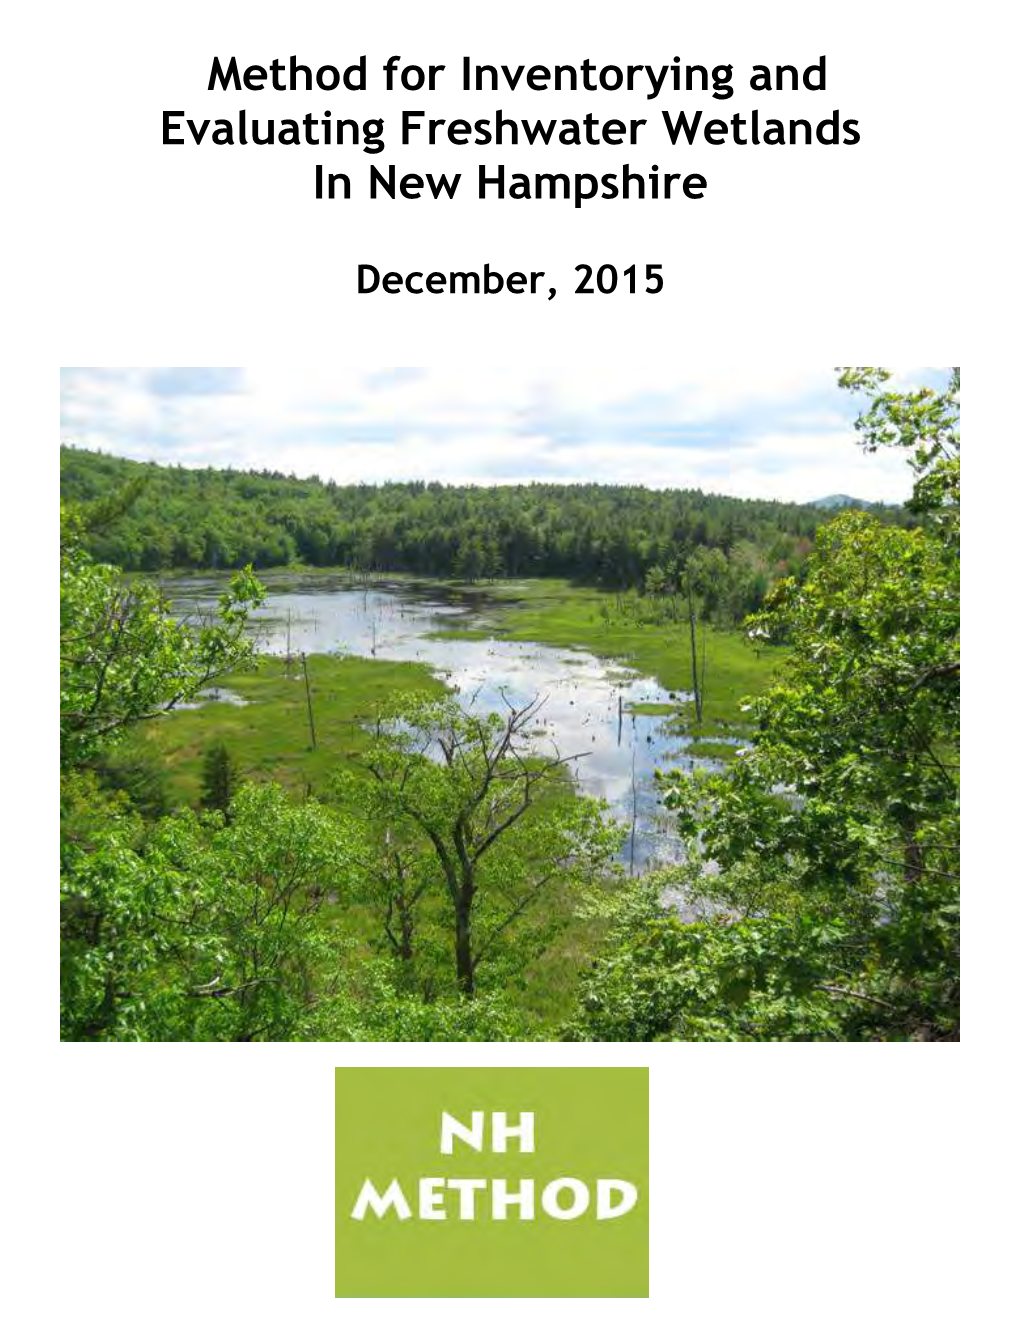 Method for Inventorying and Evaluating Freshwater Wetlands in New Hampshire